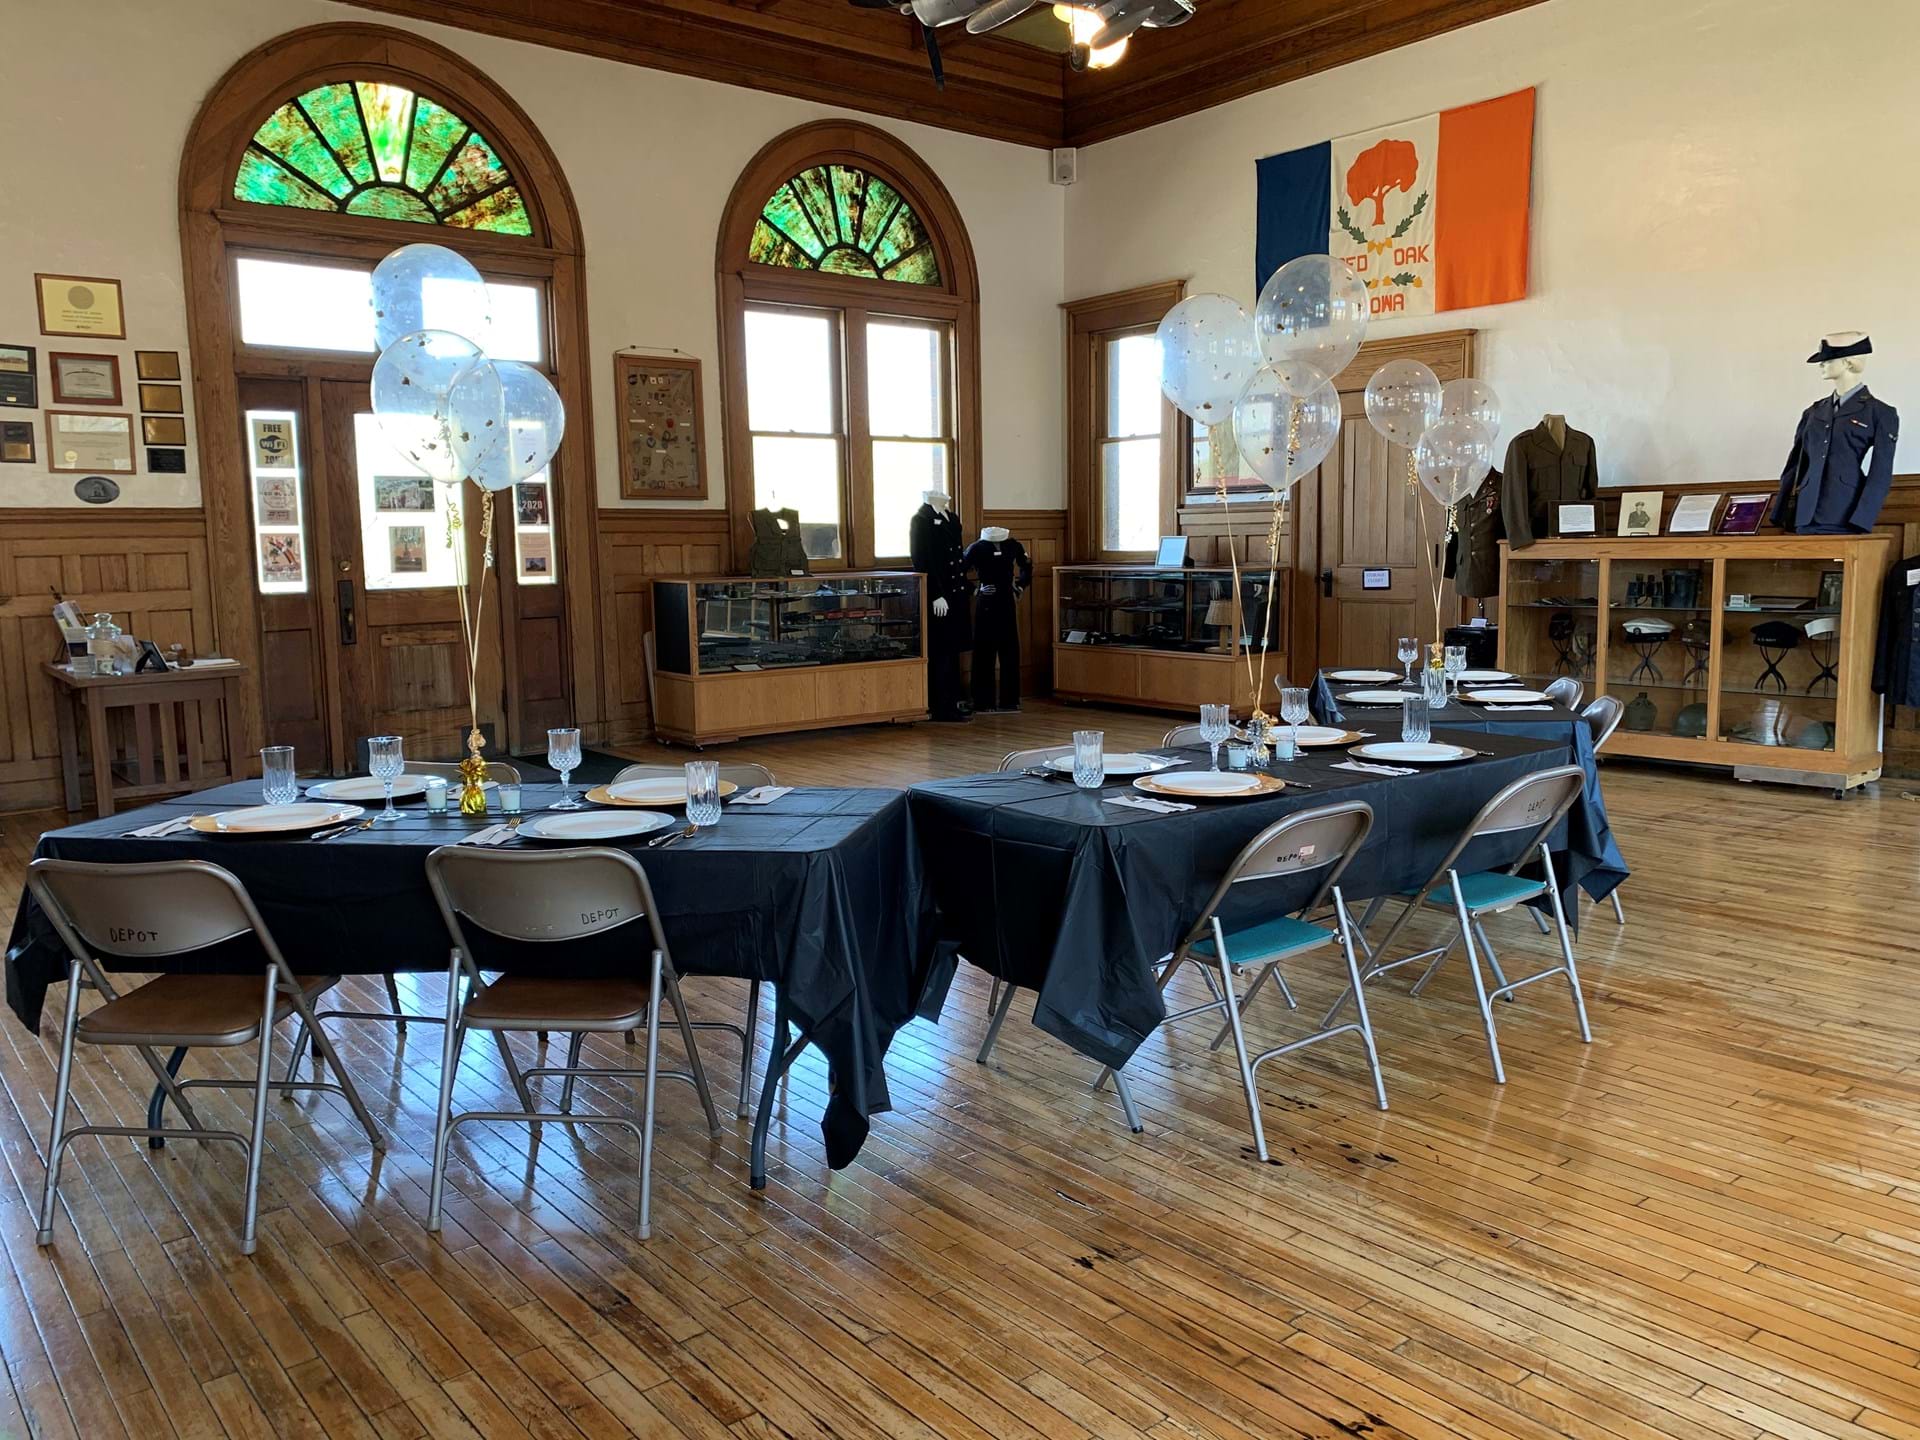 The Depot is an affordable event venue.